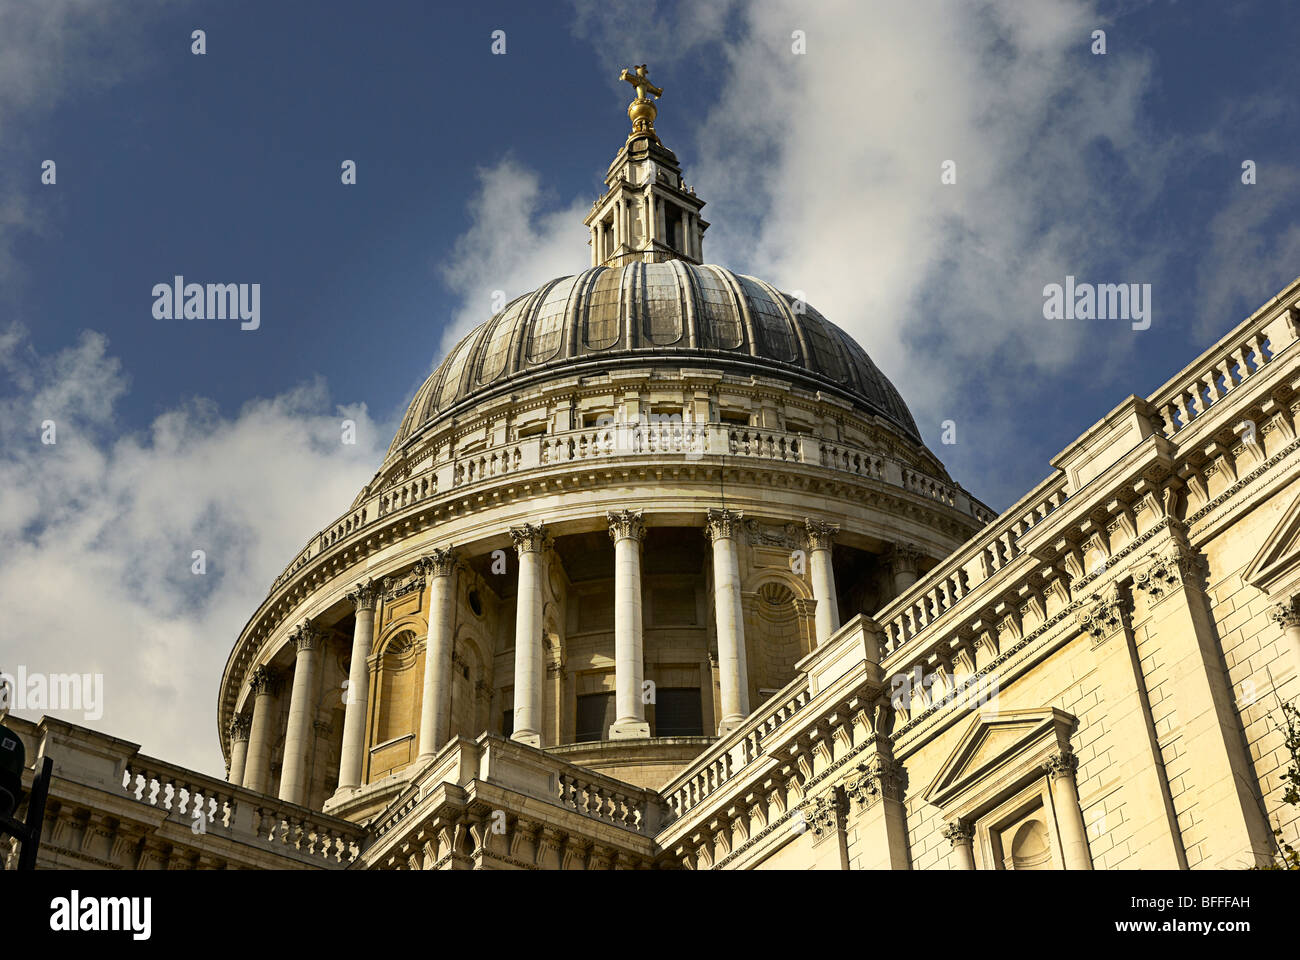 The Dome At St Paul's Cathedral London Stock Photo